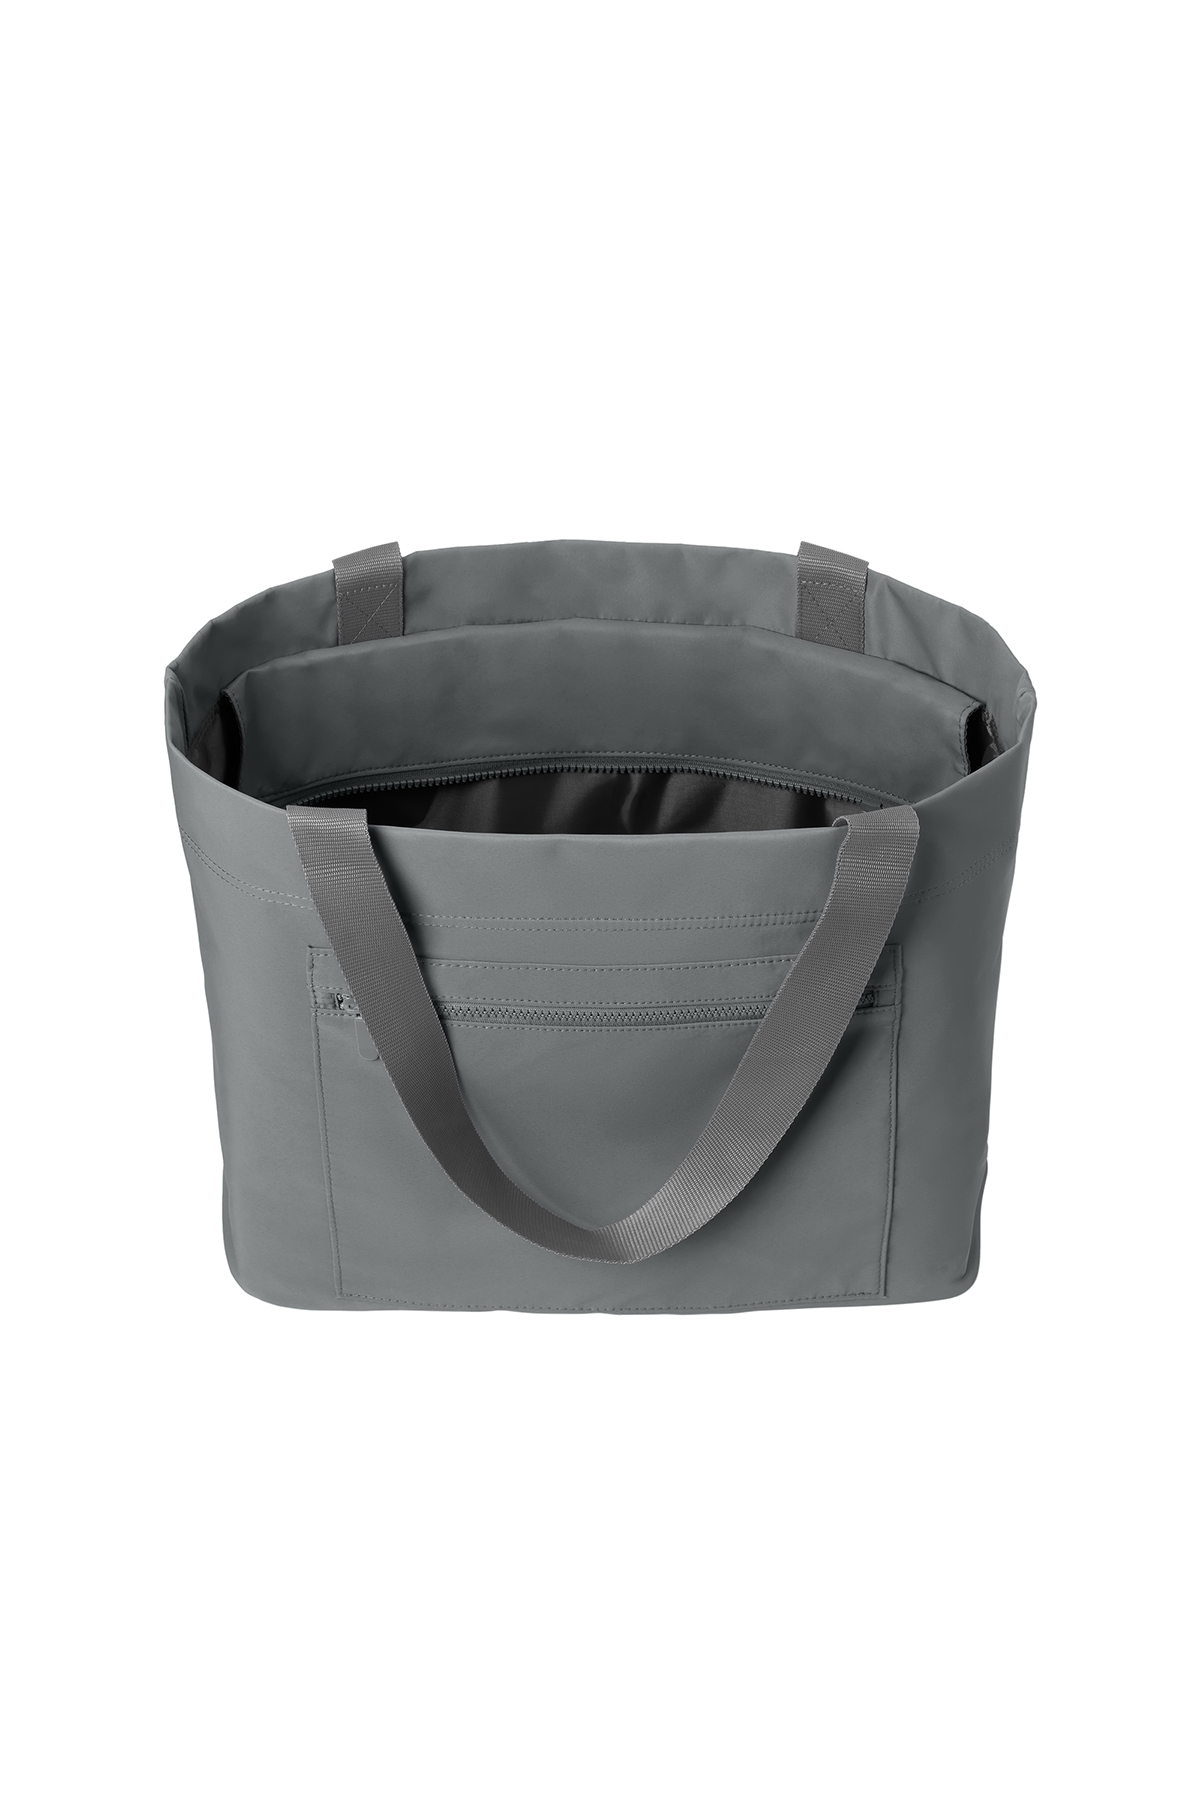 Port Authority Matte Carryall Tote | Product | SanMar